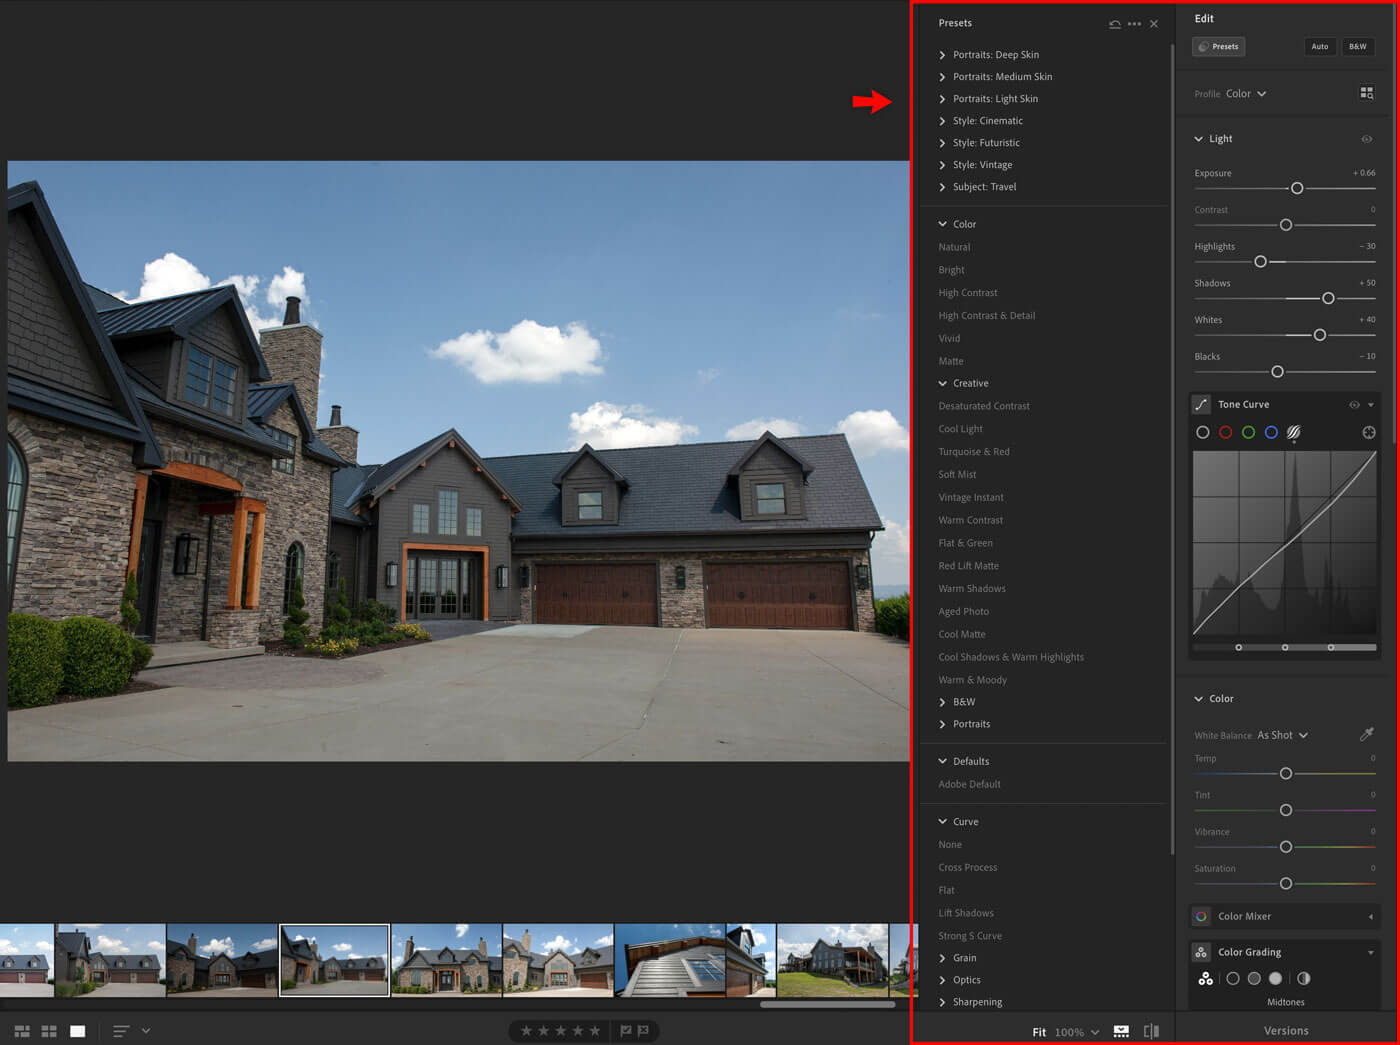 Screenshot highlights presents and adjustments for lighting, tone, color and light in Lightroom.